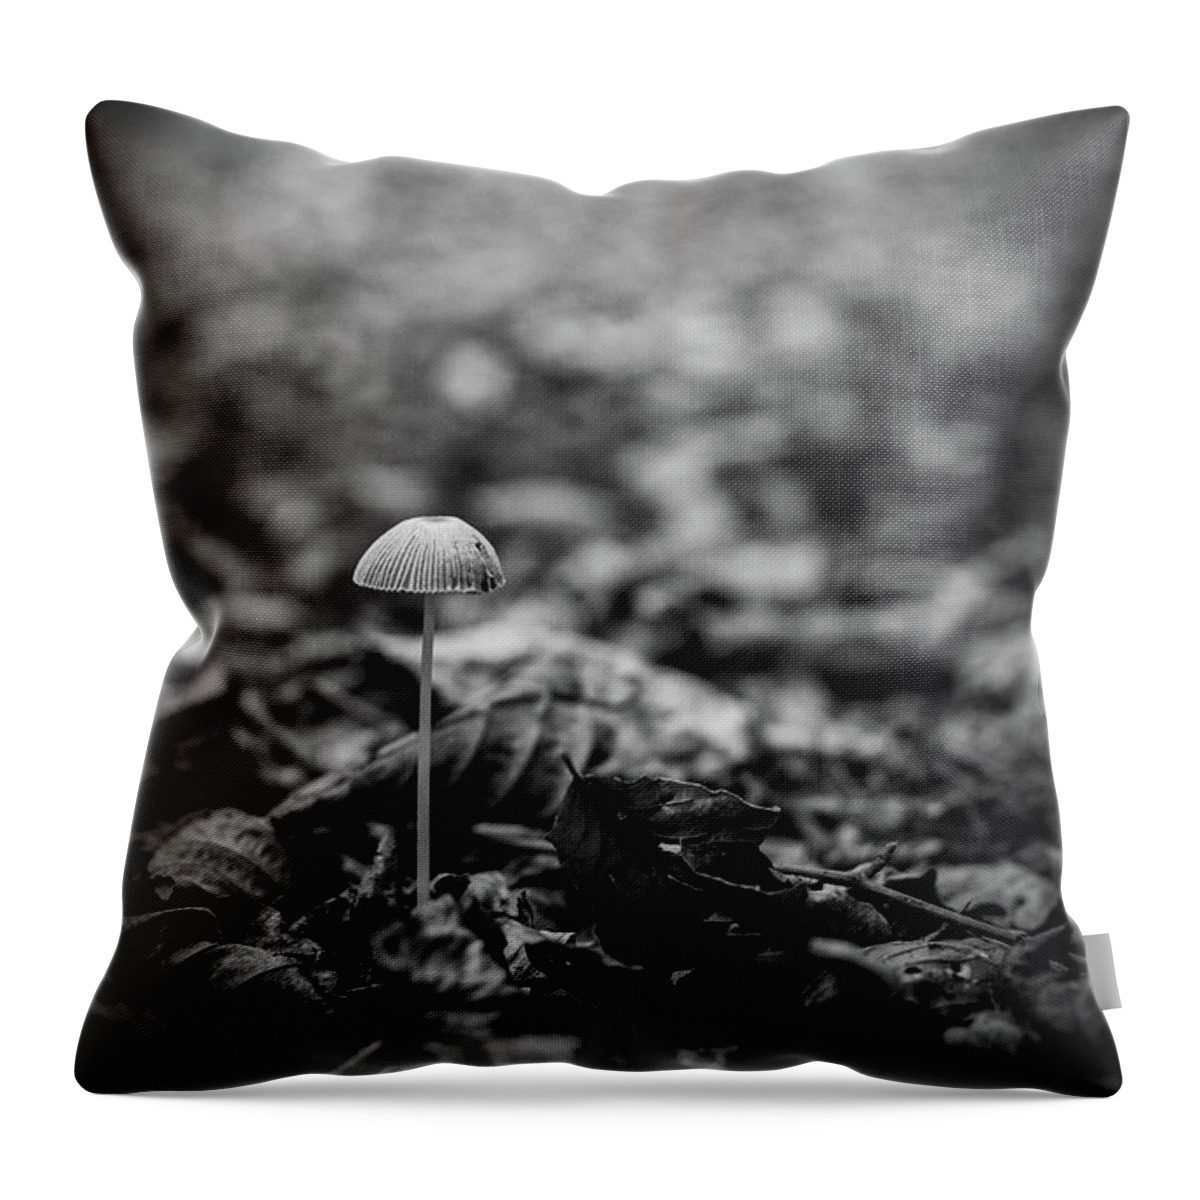 Mushroom Throw Pillow featuring the photograph Hello there little one by Gavin Lewis